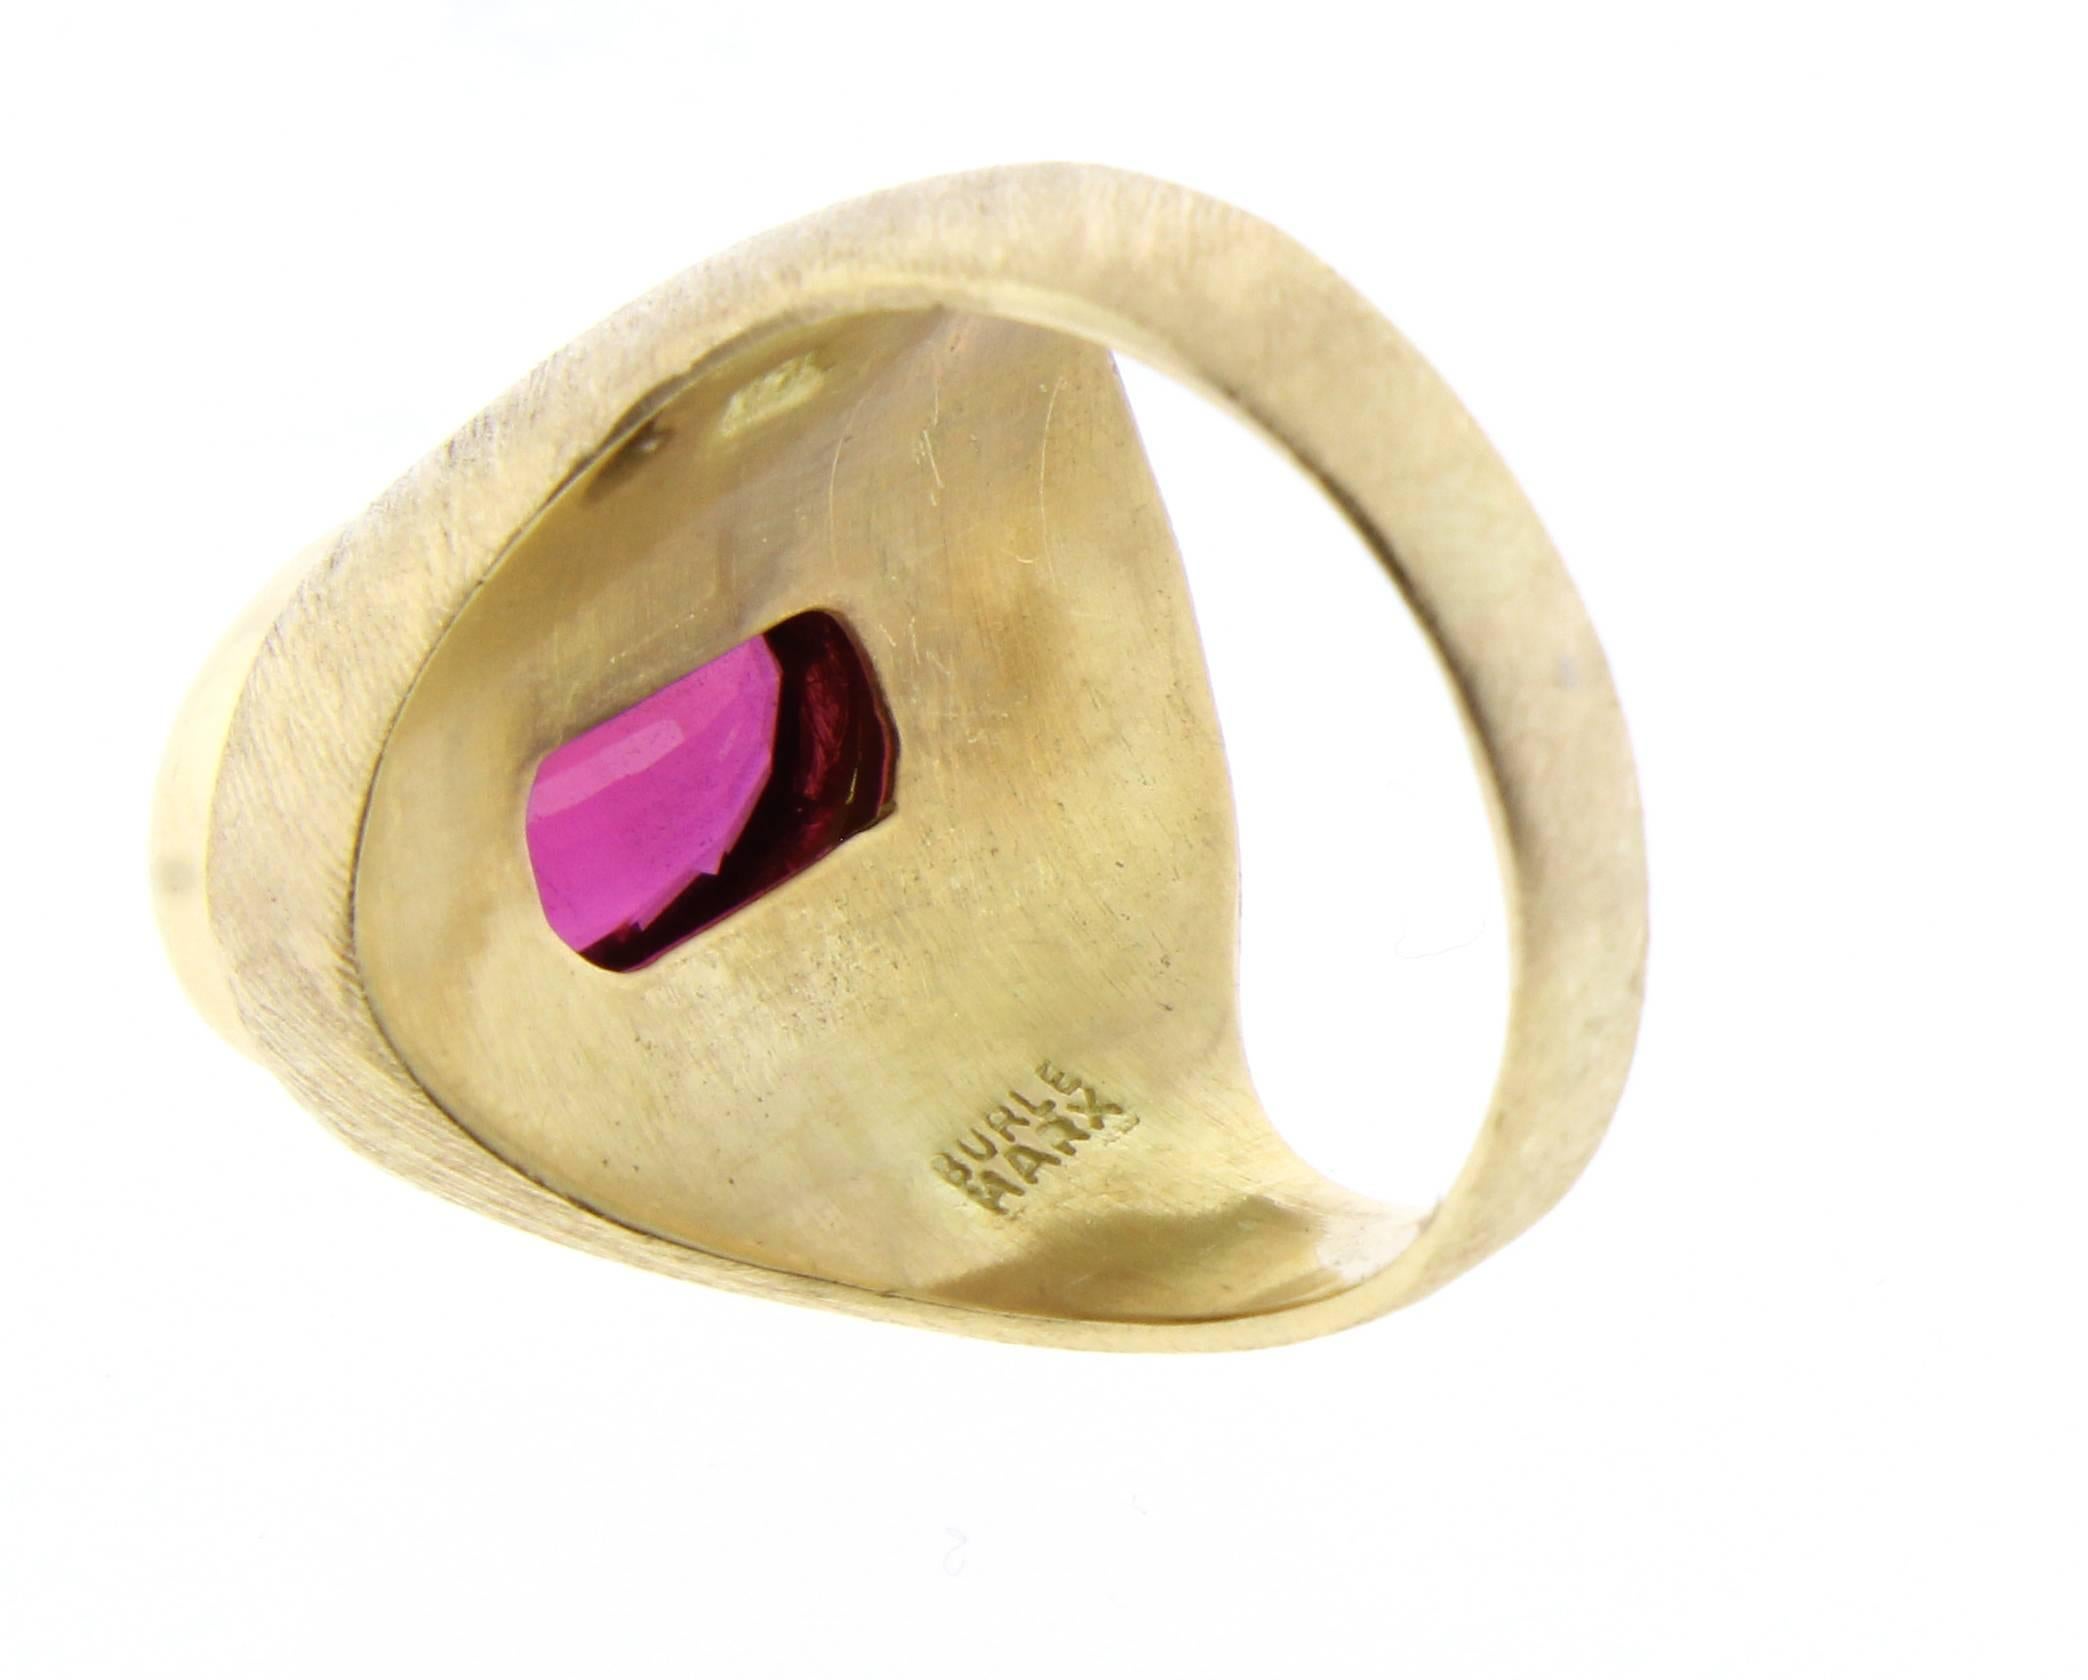 A rubellite tourmaline and diamond ring by world renowned Brazilian jeweler Haroldo Burle Marx (1911-1991). The ring features a bezel 12*9mm oval red tourmaline weighing 5 carats 13 diamonds weighing approximately .35 carats set in a brushed 18